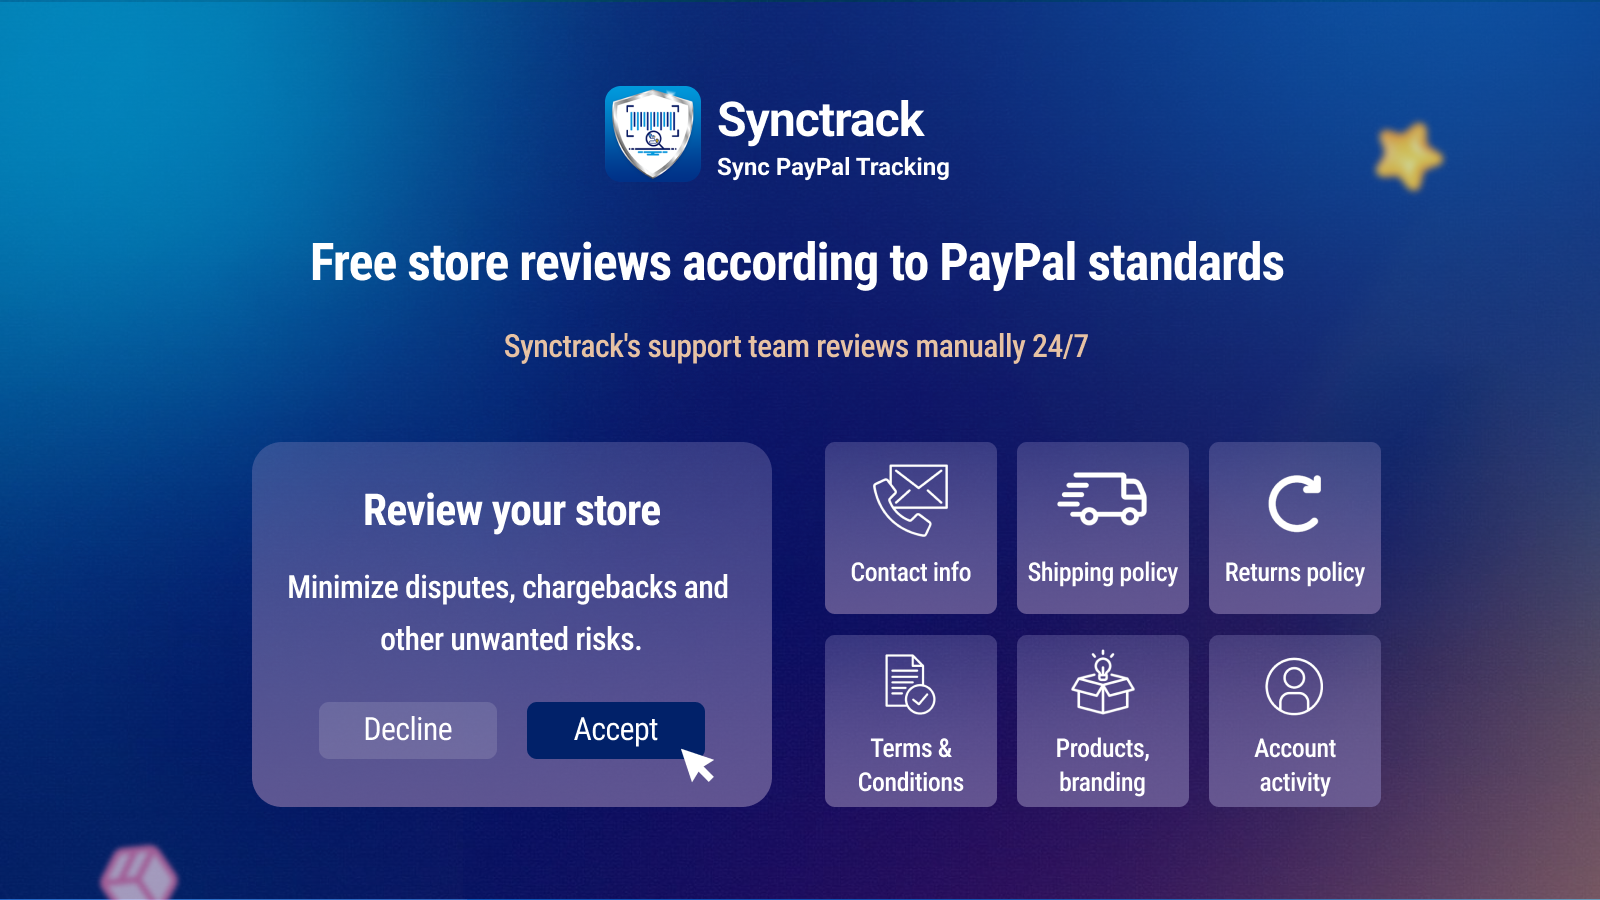 Synctrack avoid hold money by auto sync tracking